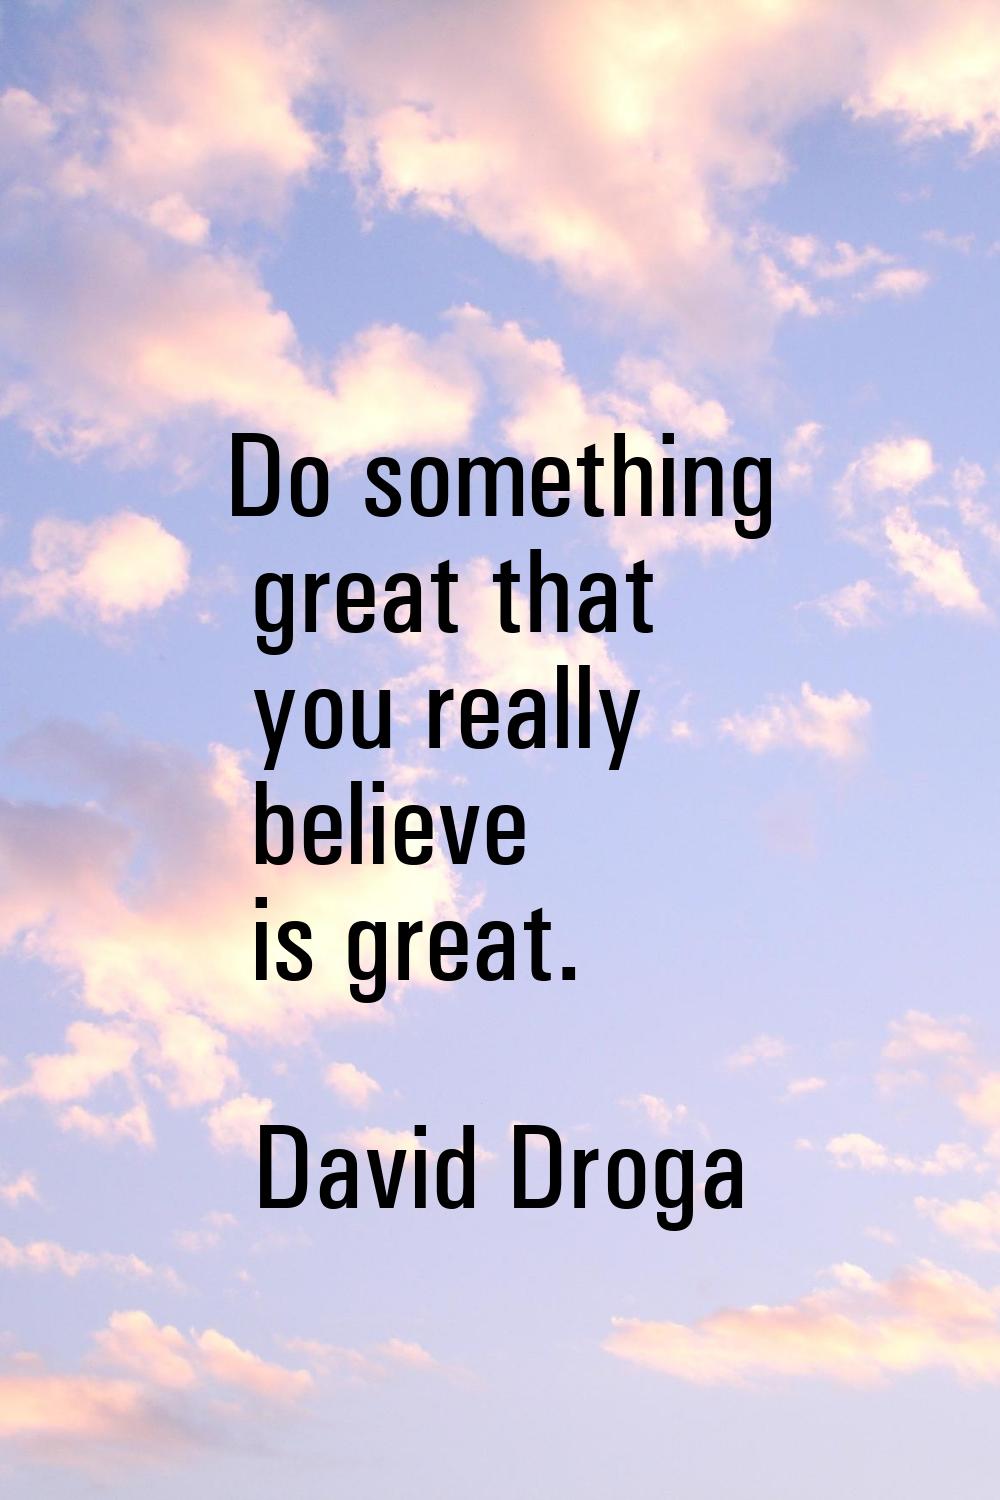 Do something great that you really believe is great.